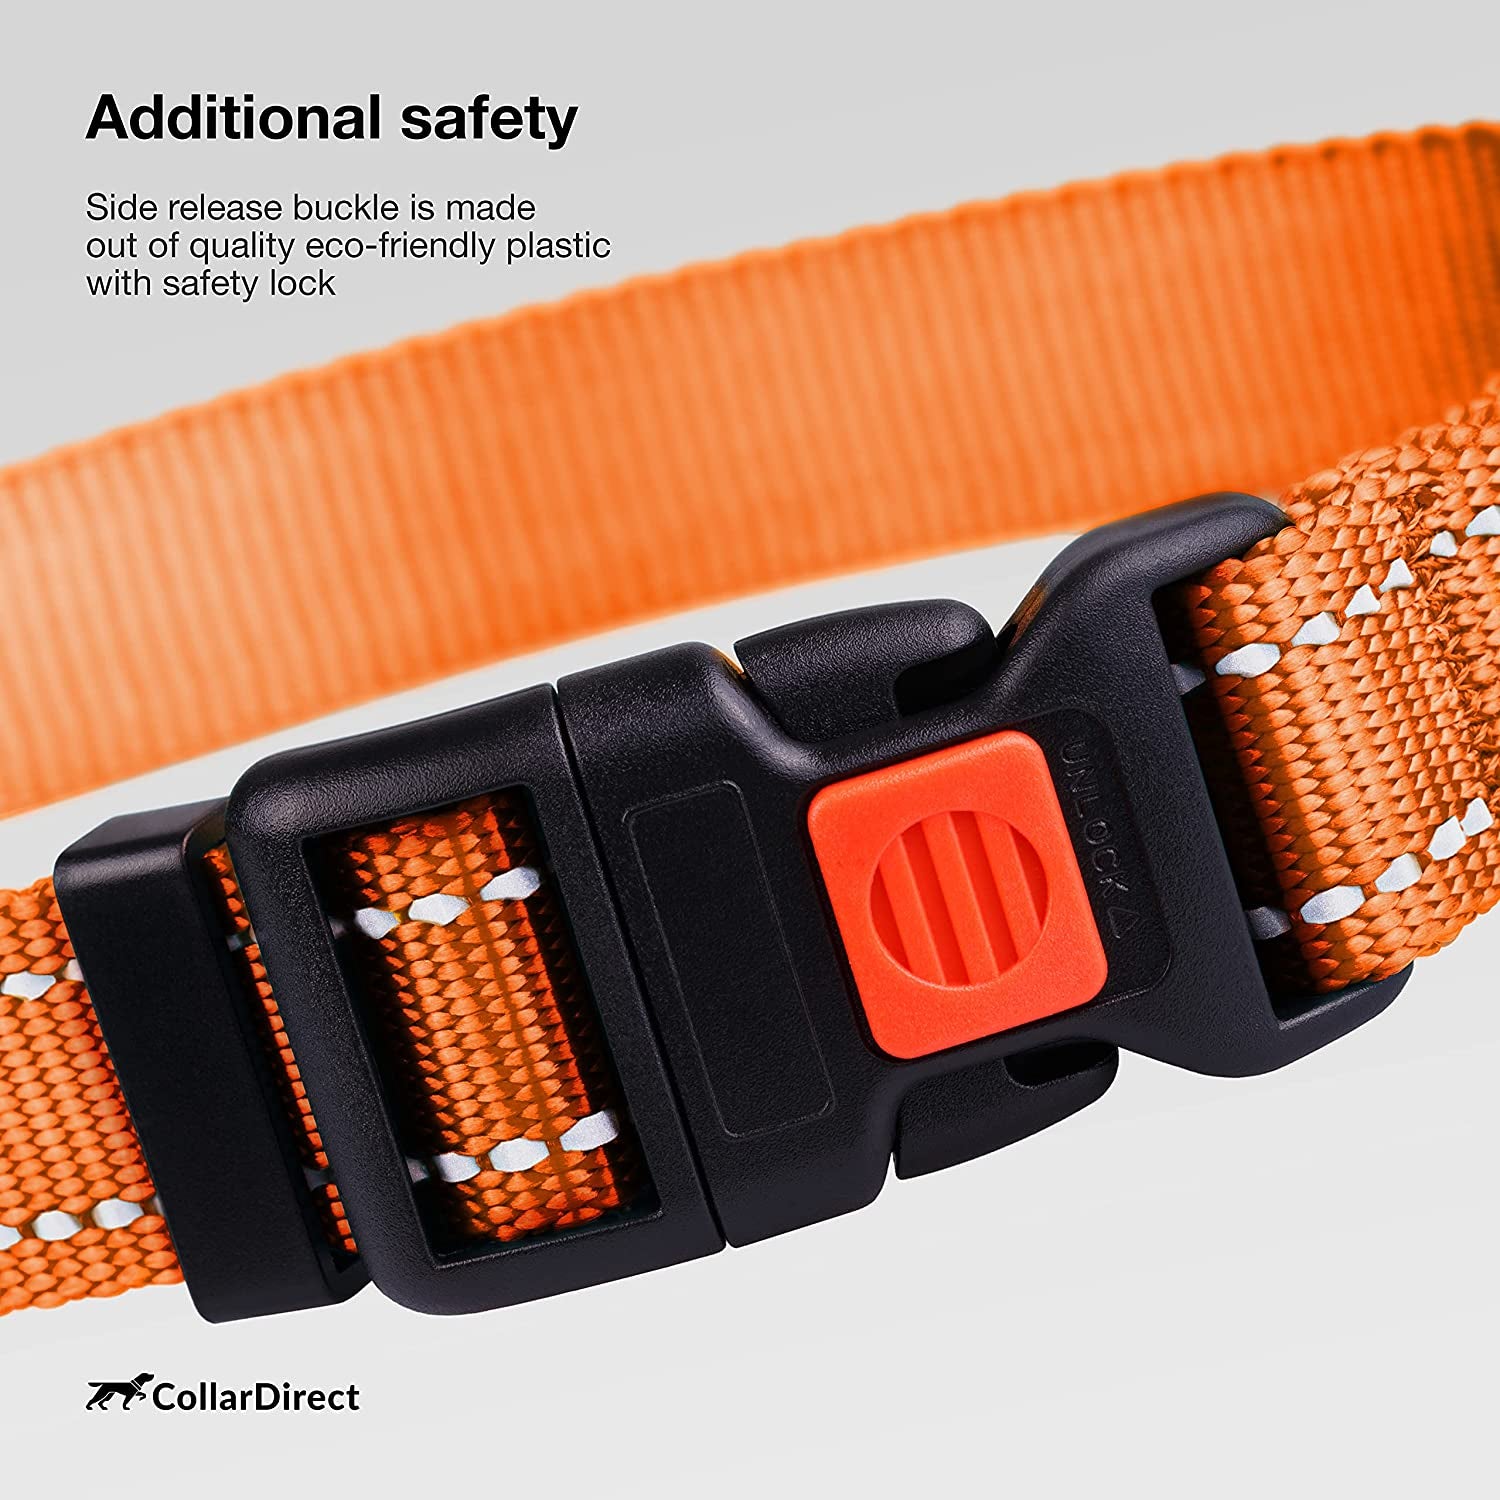 Reflective Dog Collar for a Small, Medium, Large Dog or Puppy with a Quick Release Buckle - Boy and Girl - Nylon Suitable for Swimming (10-13 Inch, Orange)